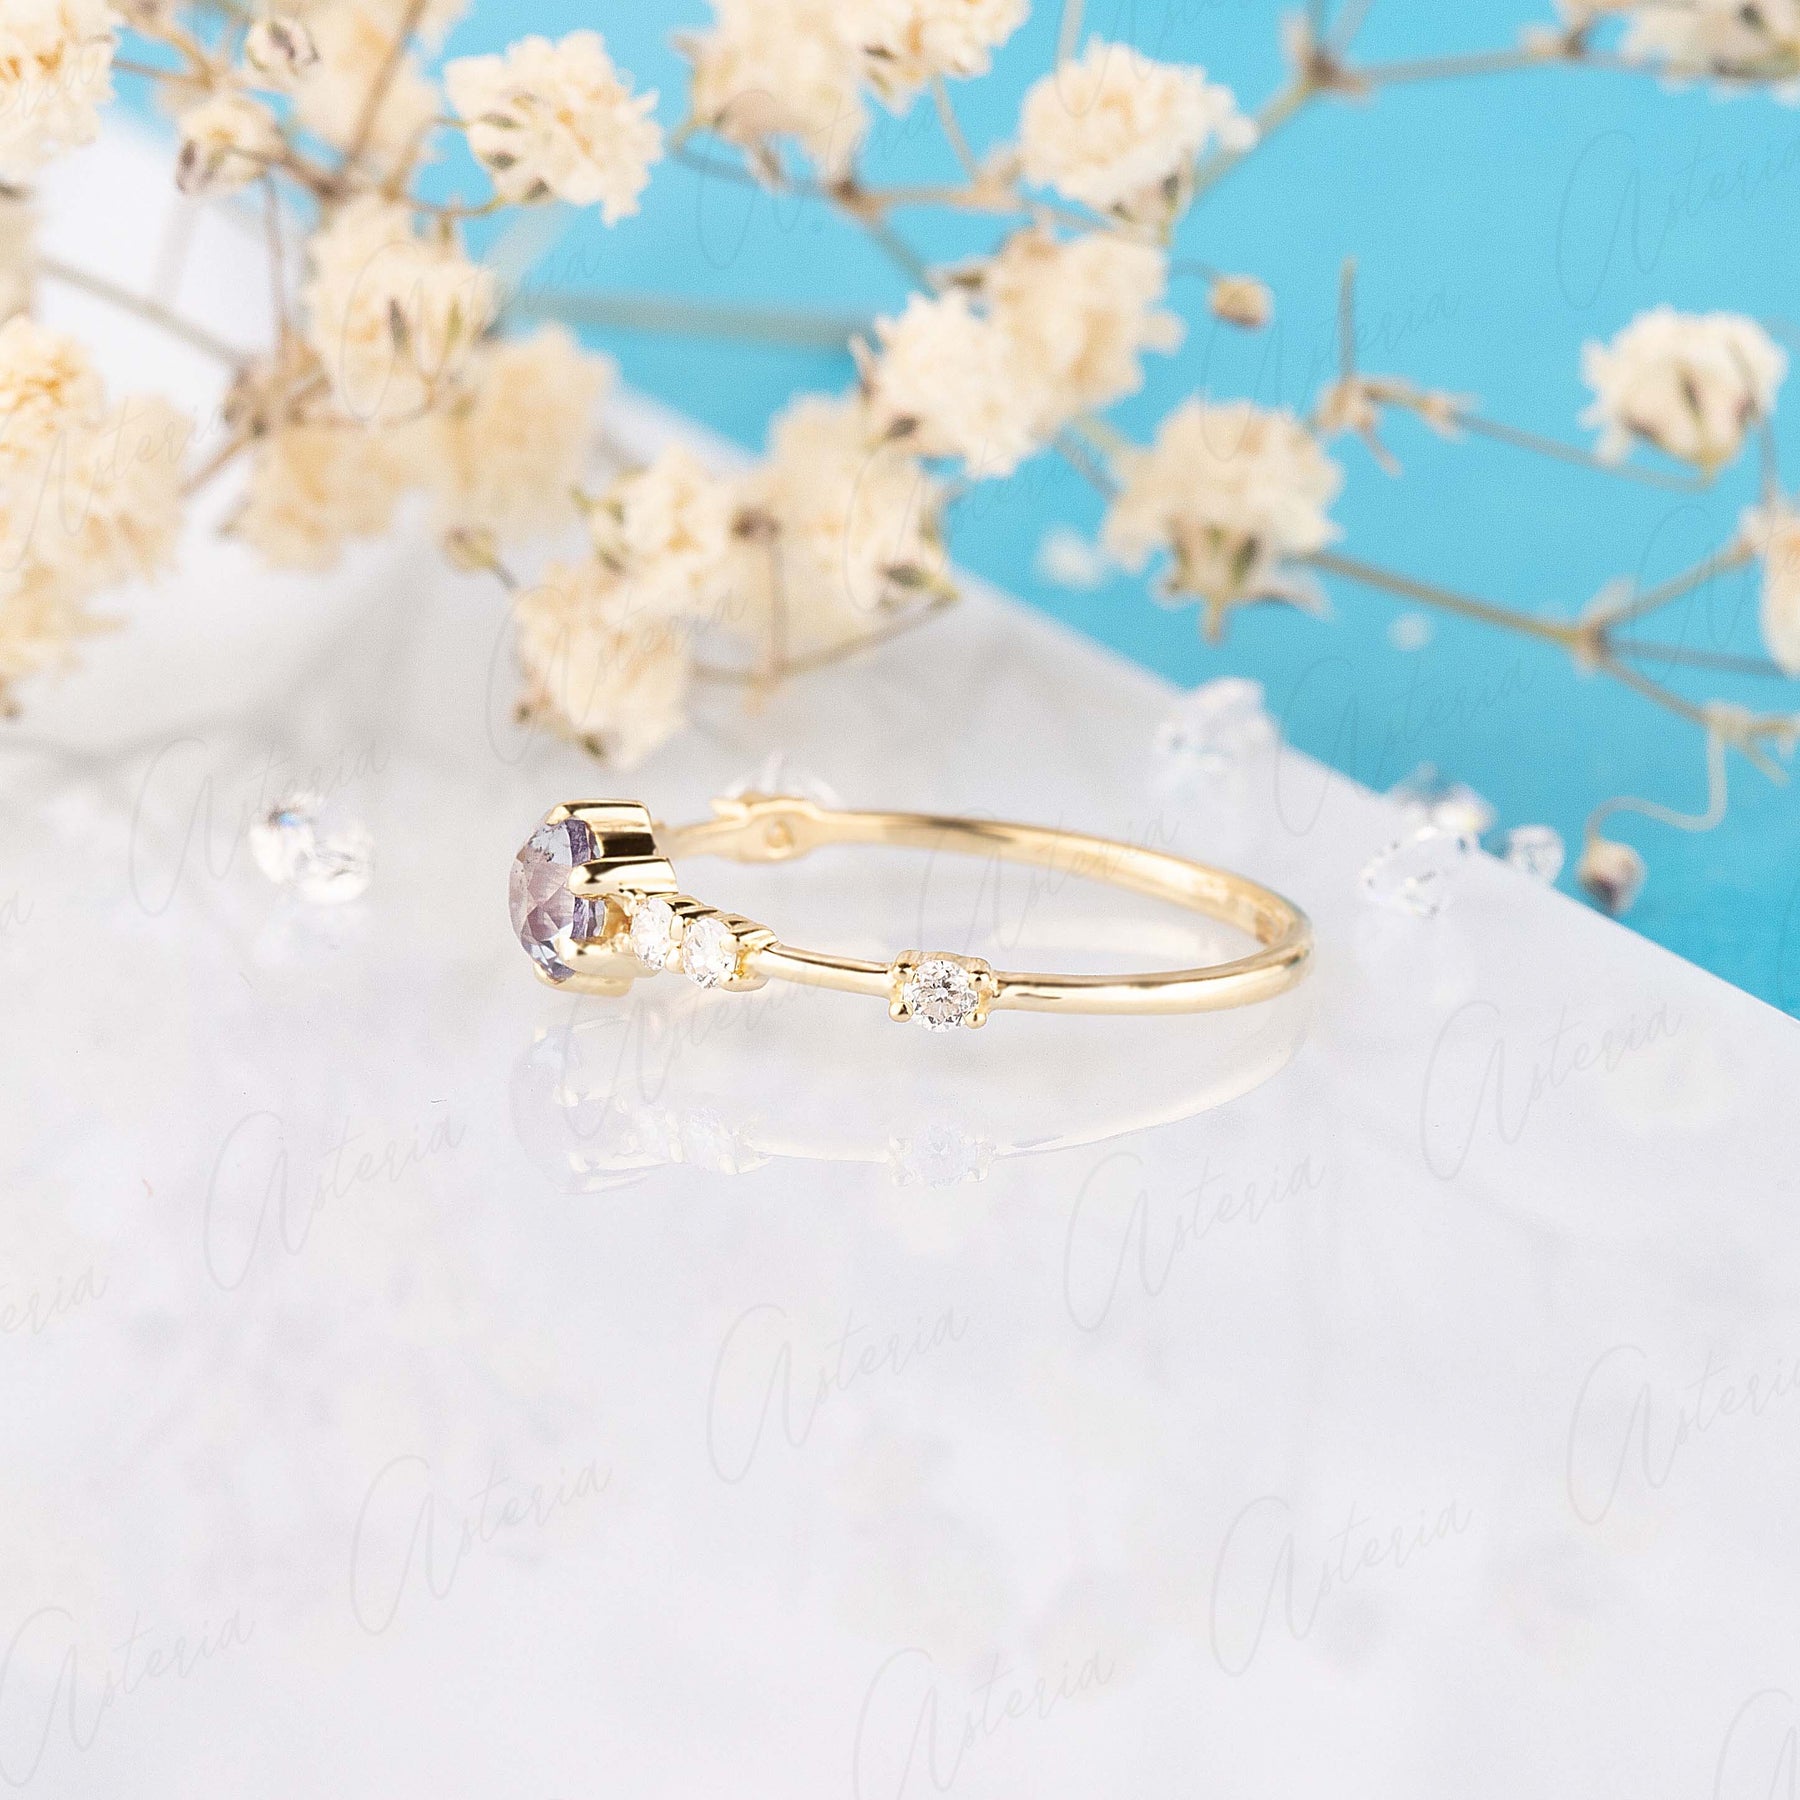 Simple dainty 14k yellow gold alexandrite promise ring for her